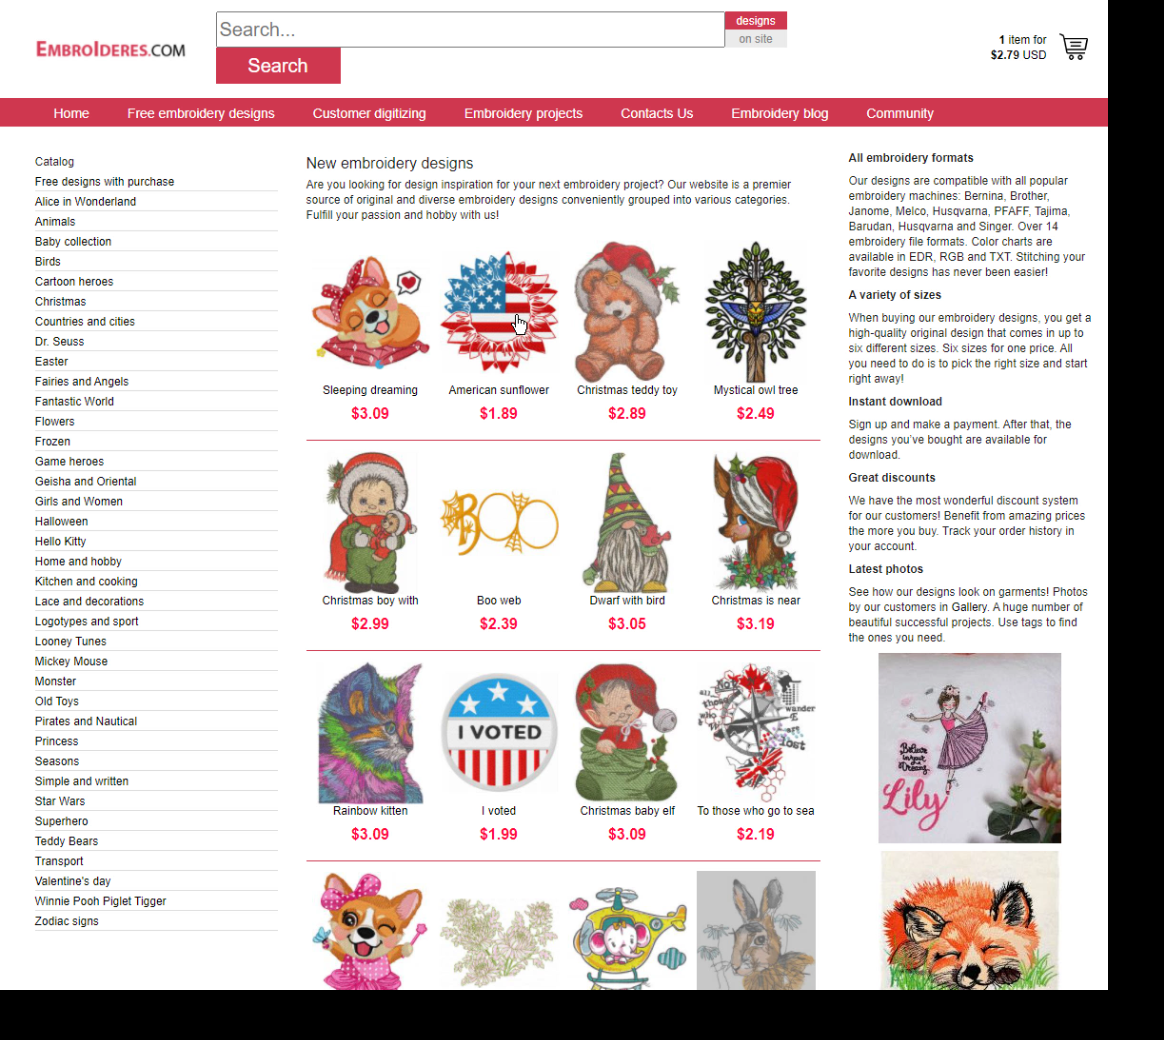 How download free embroidery designs from Embroideres.com